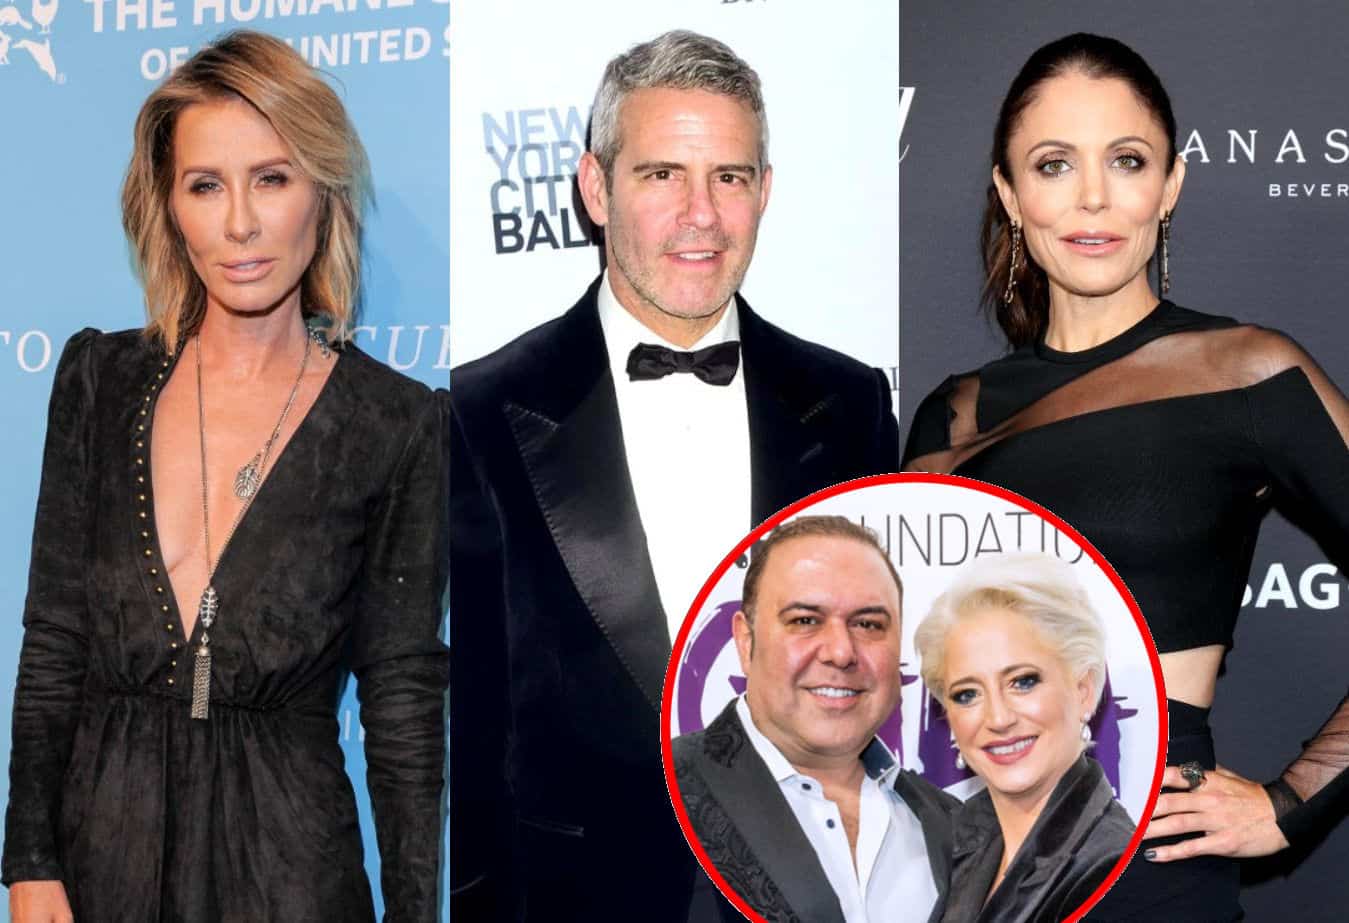 Ex RHONY Star Carole Radziwill Explains Why Andy Cohen Was Upset With Bethenny Frankel and Where She Stands With Andy, Dishes on Dorinda Medley's Split From John Mahdessian